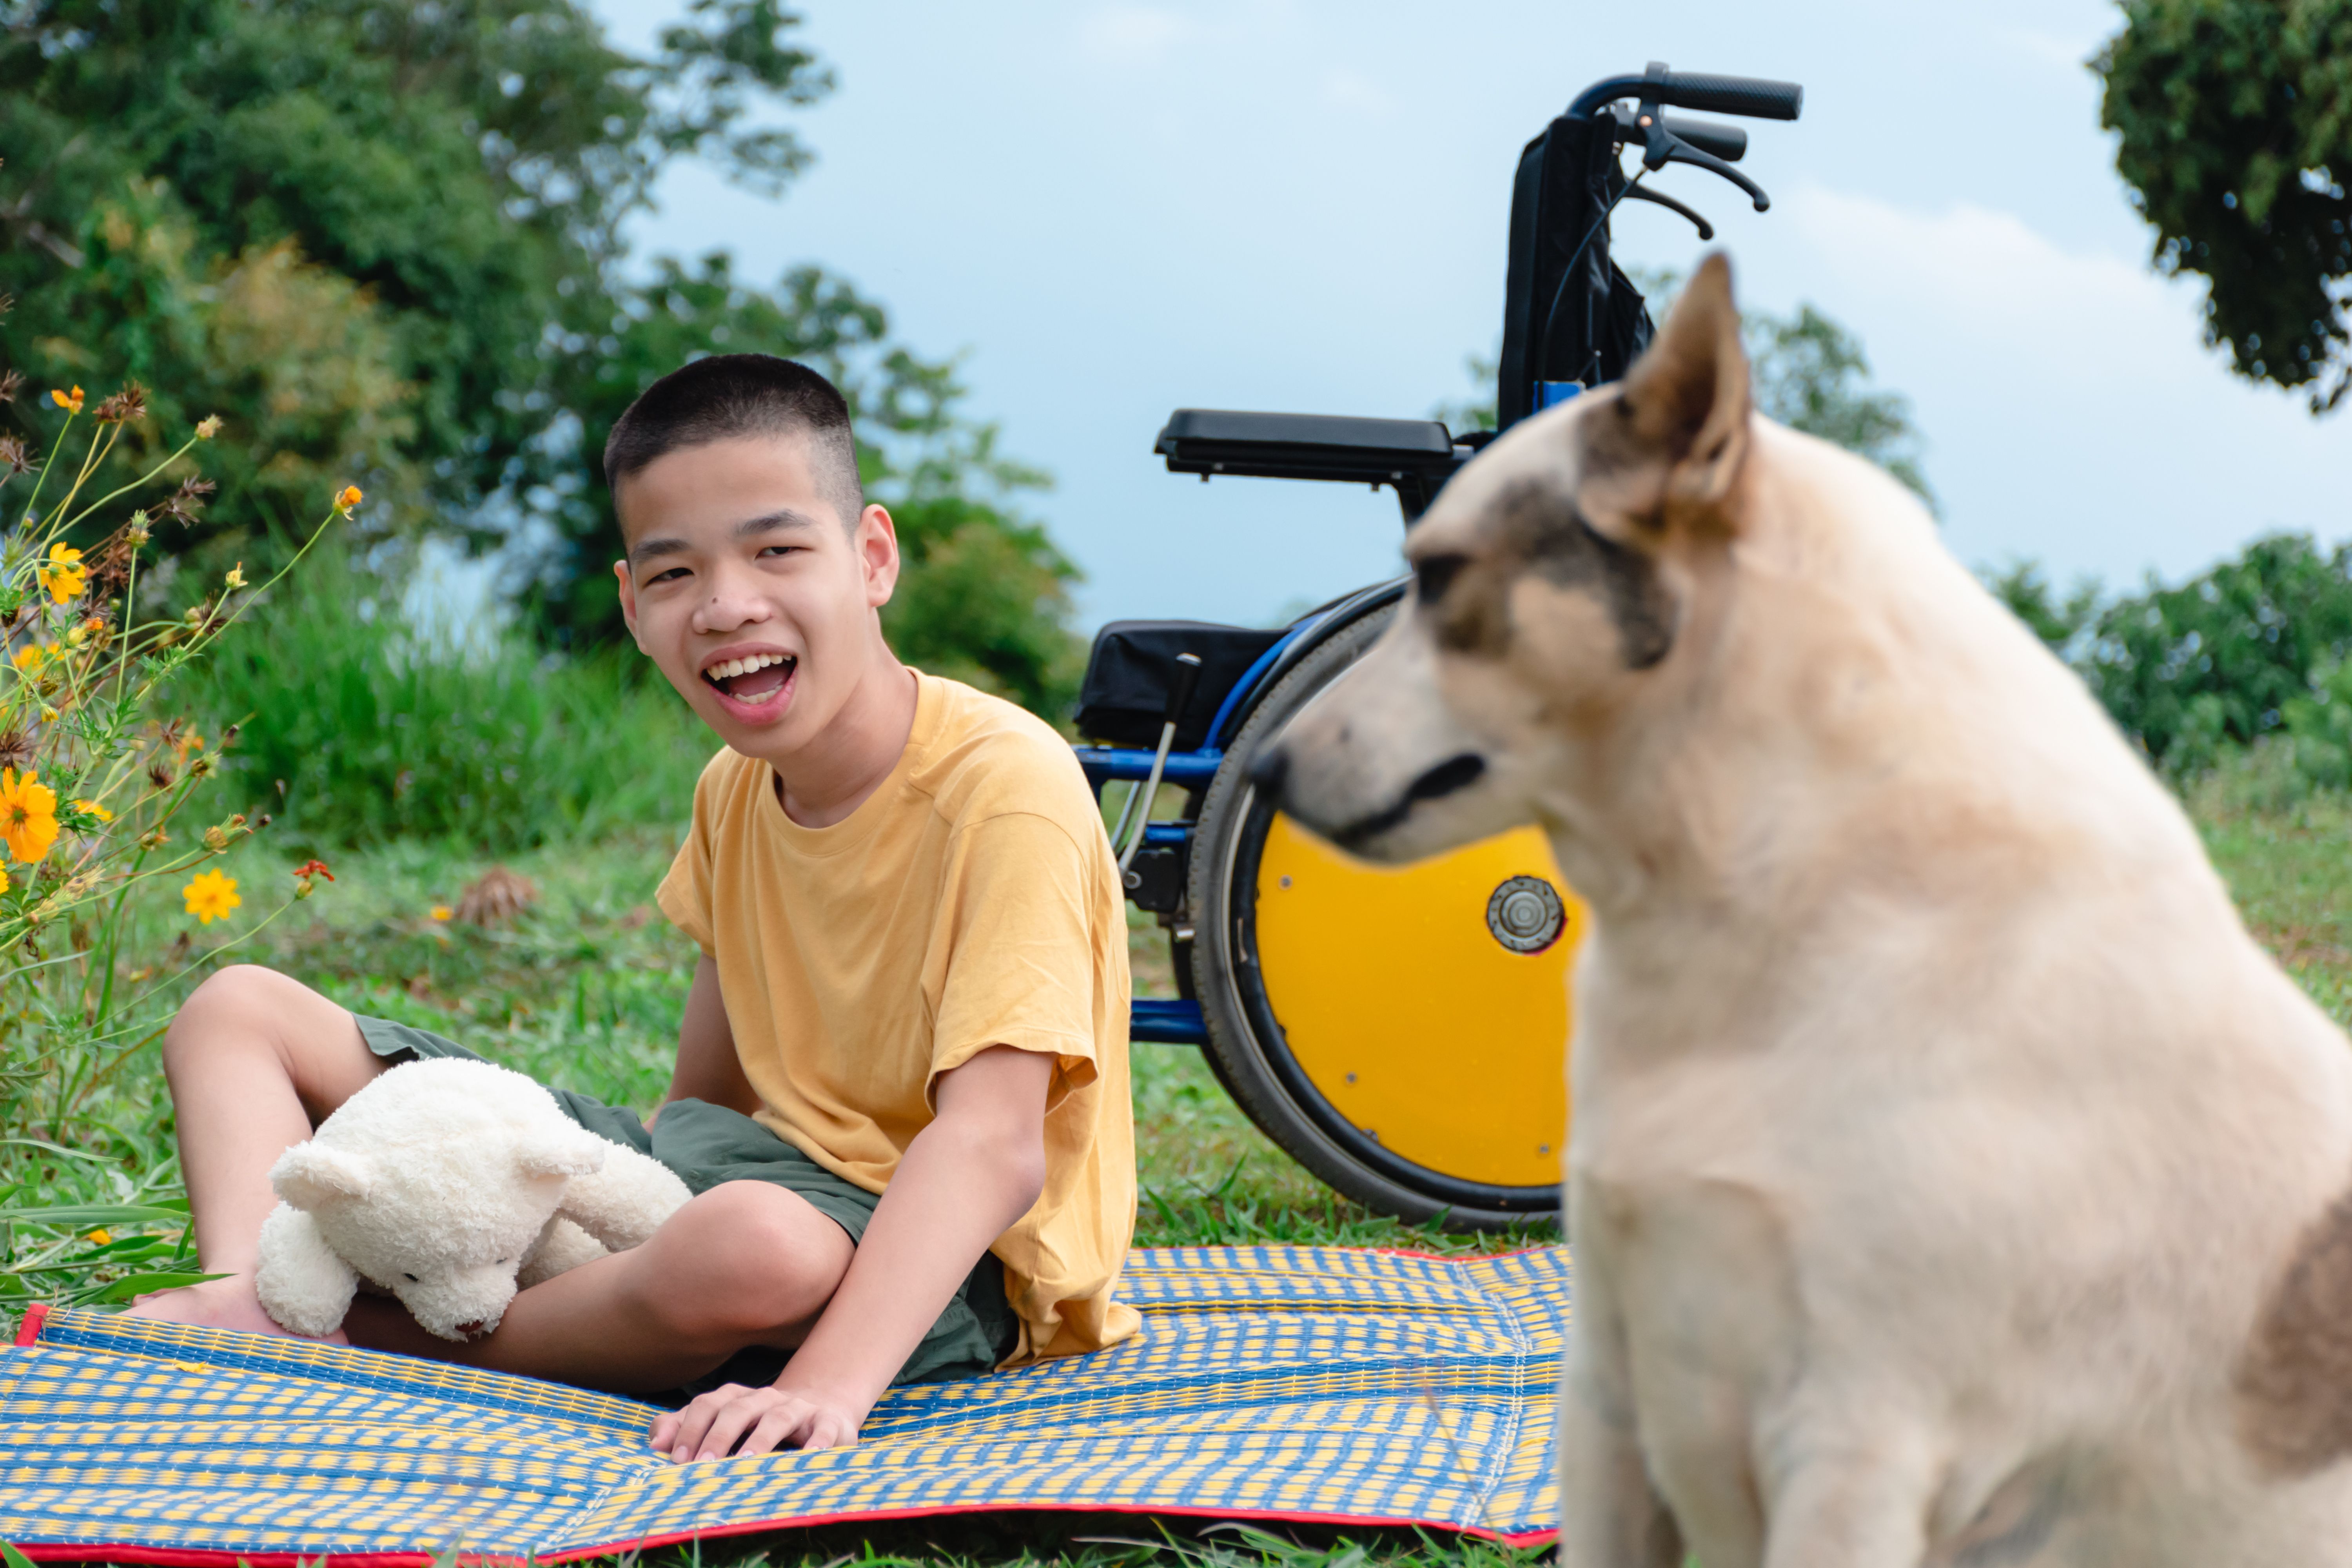 special needs boy at park with dog